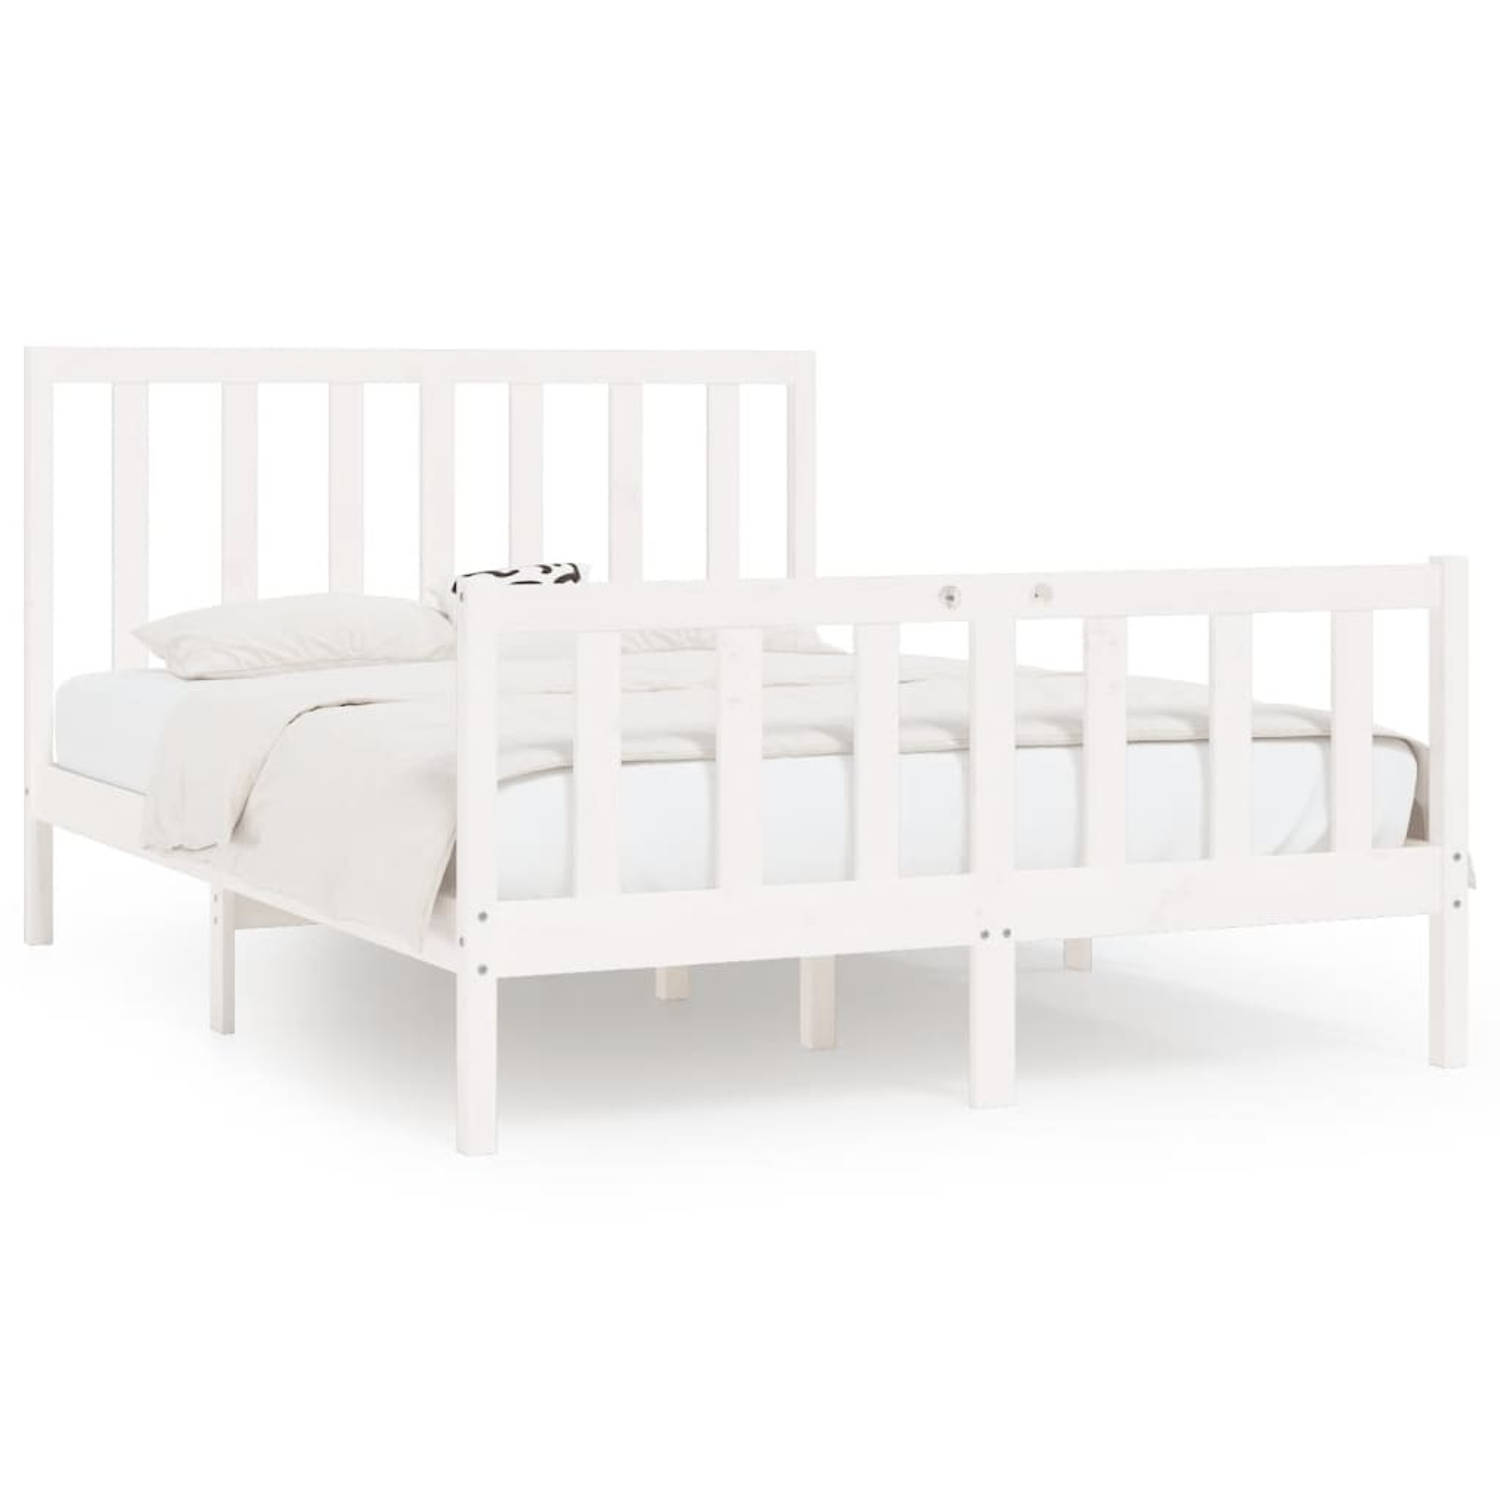 The Living Store Bedframe massief hout wit 140x200 cm - Bedframe - Bedframes - Tweepersoonsbed - Bed - Bedombouw - Dubbel Bed - Frame - Bed Frame - Ledikant - Bedframe Met Hoofdein